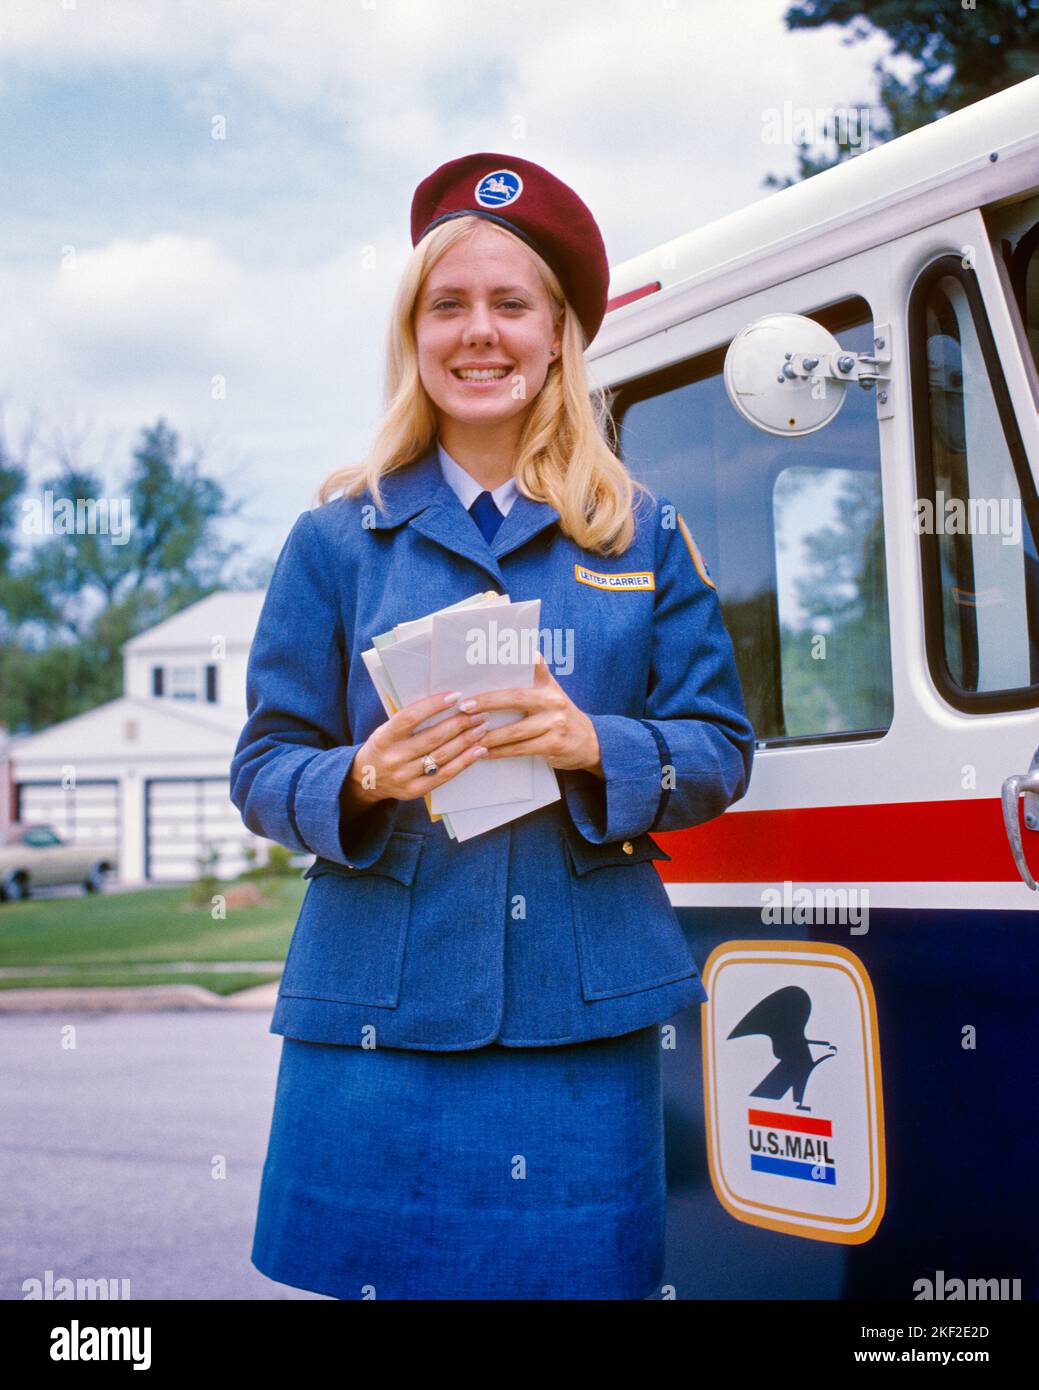 1970s PORTRAIT SMILING BLONDE FEMALE MAILMAN HOLDING ENVELOPES WEARING UNIFORM & CAP STANDING BY POSTAL USPS DELIVERY VEHICLE - kp2139 HAR001 HARS 1 STYLE COMMUNICATION VEHICLE YOUNG ADULT PLEASED JOY LIFESTYLE SATISFACTION FEMALES JOBS HEALTHINESS UNITED STATES COPY SPACE FRIENDSHIP HALF-LENGTH LADIES PERSONS POSTAL UNITED STATES OF AMERICA CONFIDENCE NORTH AMERICA EYE CONTACT NORTH AMERICAN SKILL OCCUPATION HAPPINESS SKILLS CHEERFUL ENVELOPES CUSTOMER SERVICE LABOR PRIDE EMPLOYMENT OCCUPATIONS SMILES MAILING JOYFUL MAILMAN STYLISH EMPLOYEE USPS COOPERATION UNITED STATES POSTAL SERVICE Stock Photo